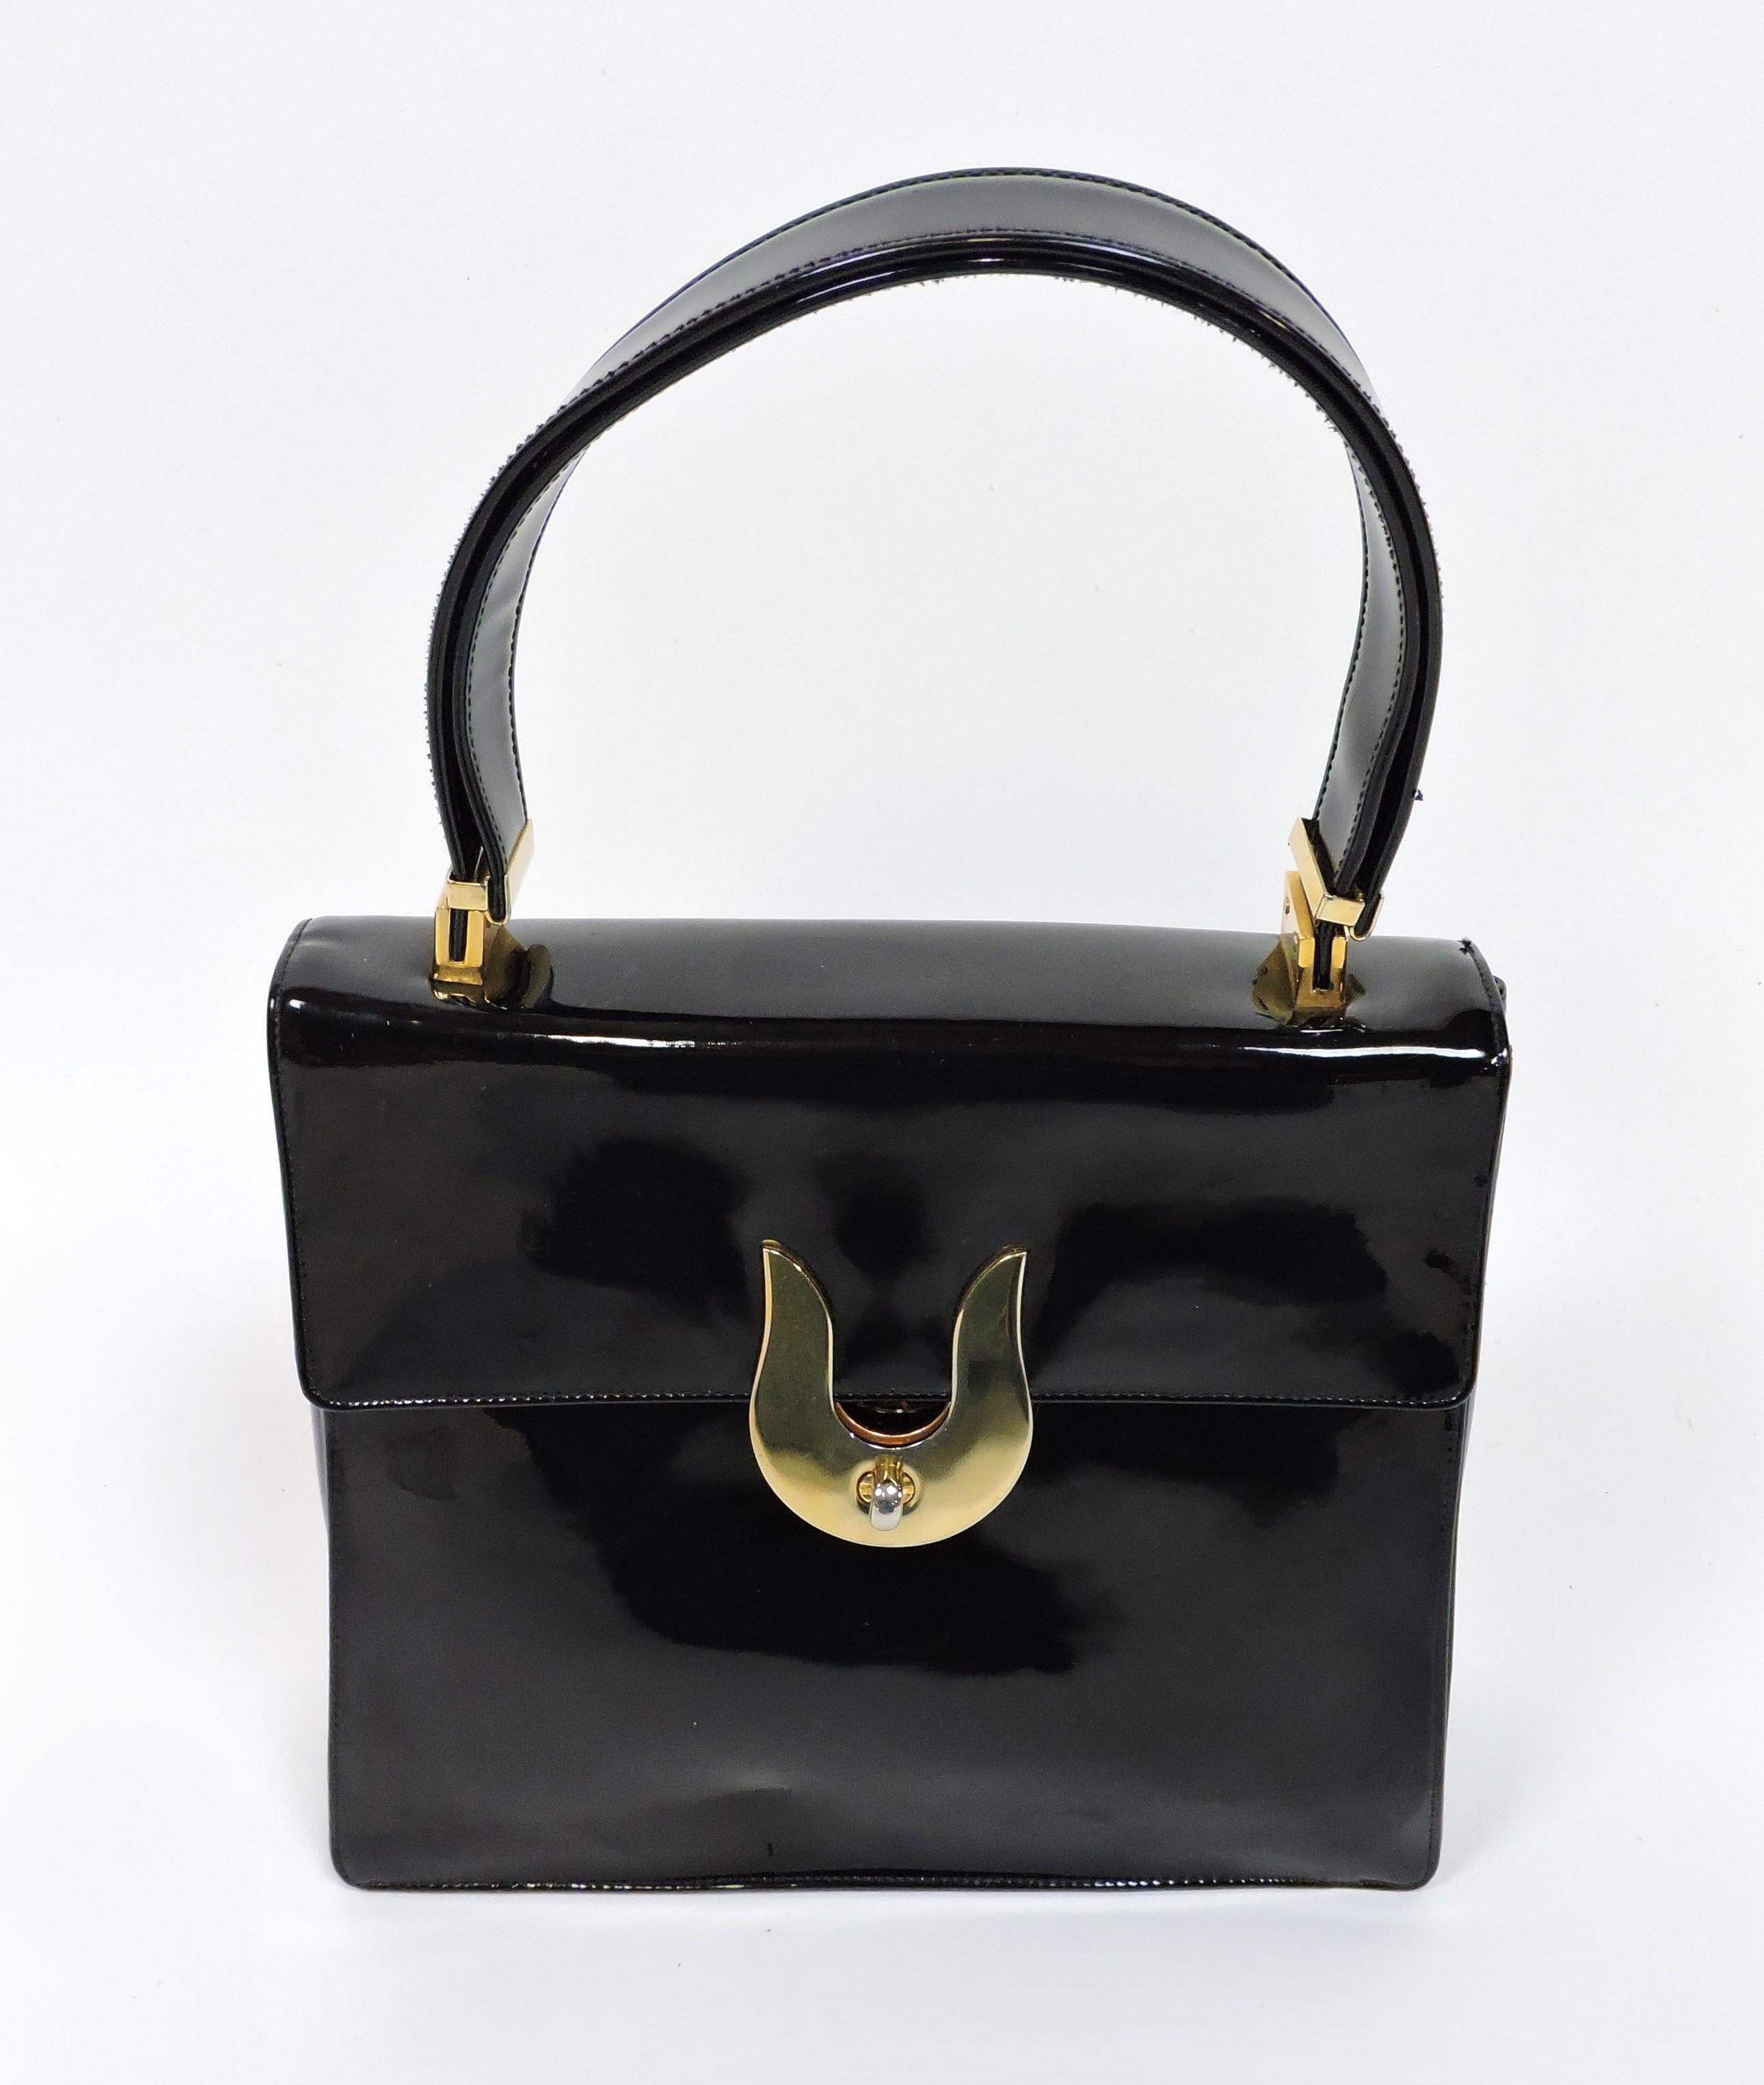 Stylish black patent leather adjustable handbag made by high end manufacturer, Koret. This bag has a fold over flap with an unusual brass U-shaped twist clasp closure. The interior is lined with leather and has a pocket with a chain purse tethered